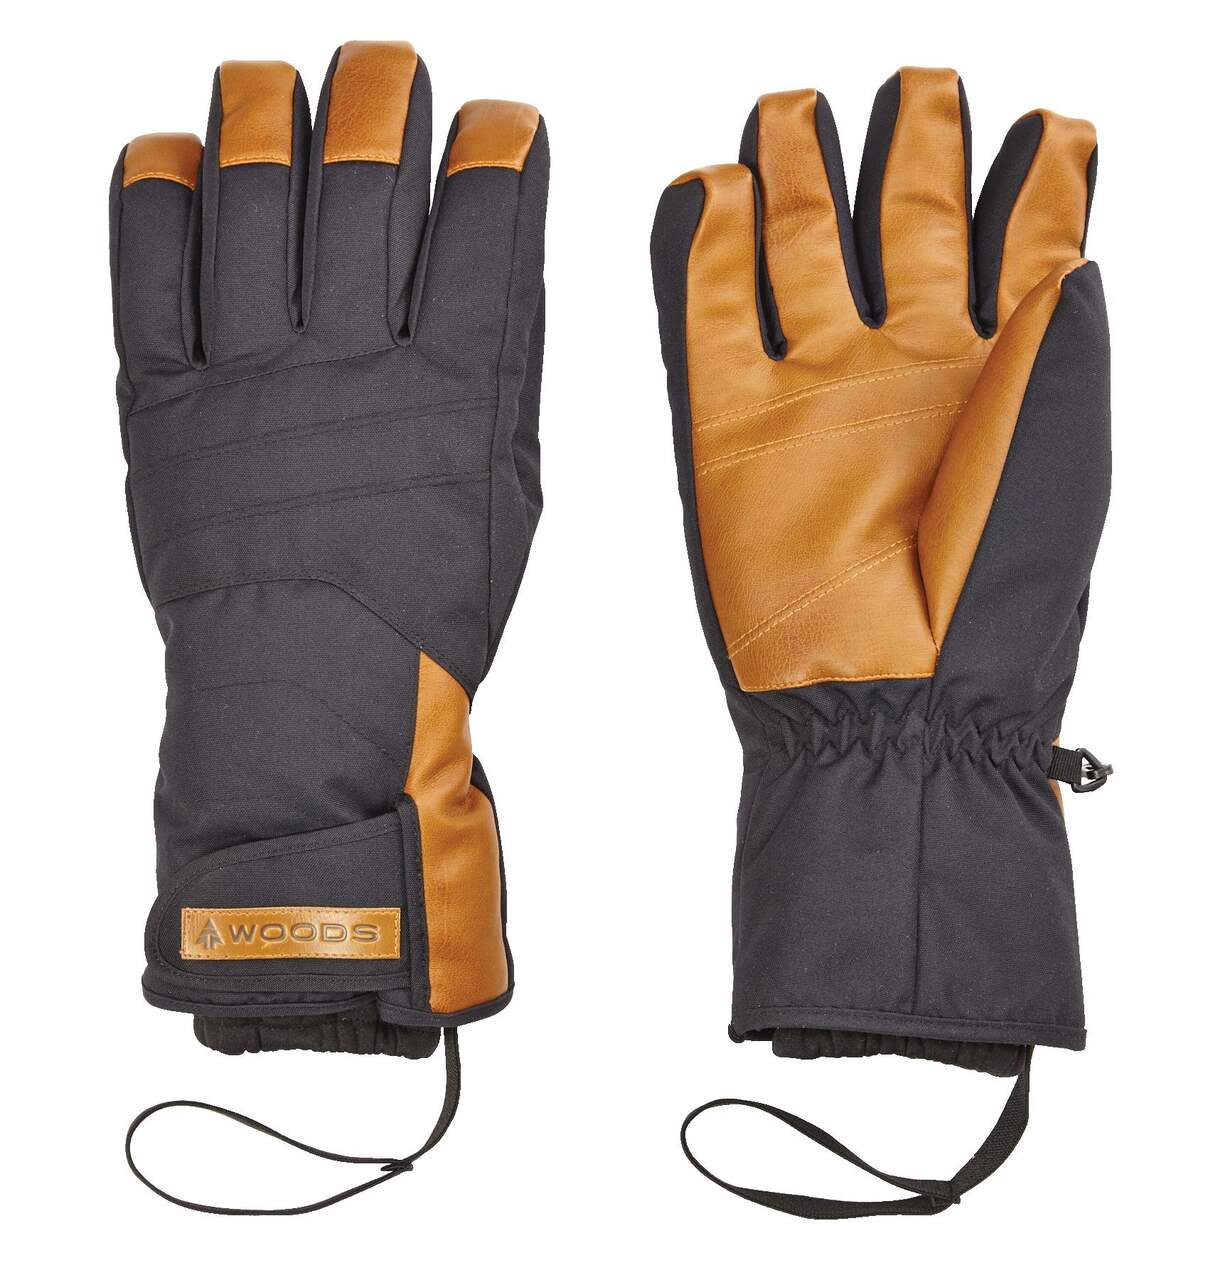 Winter Work Gloves Men Women Insulated Thermal Lined Outdoor Ski